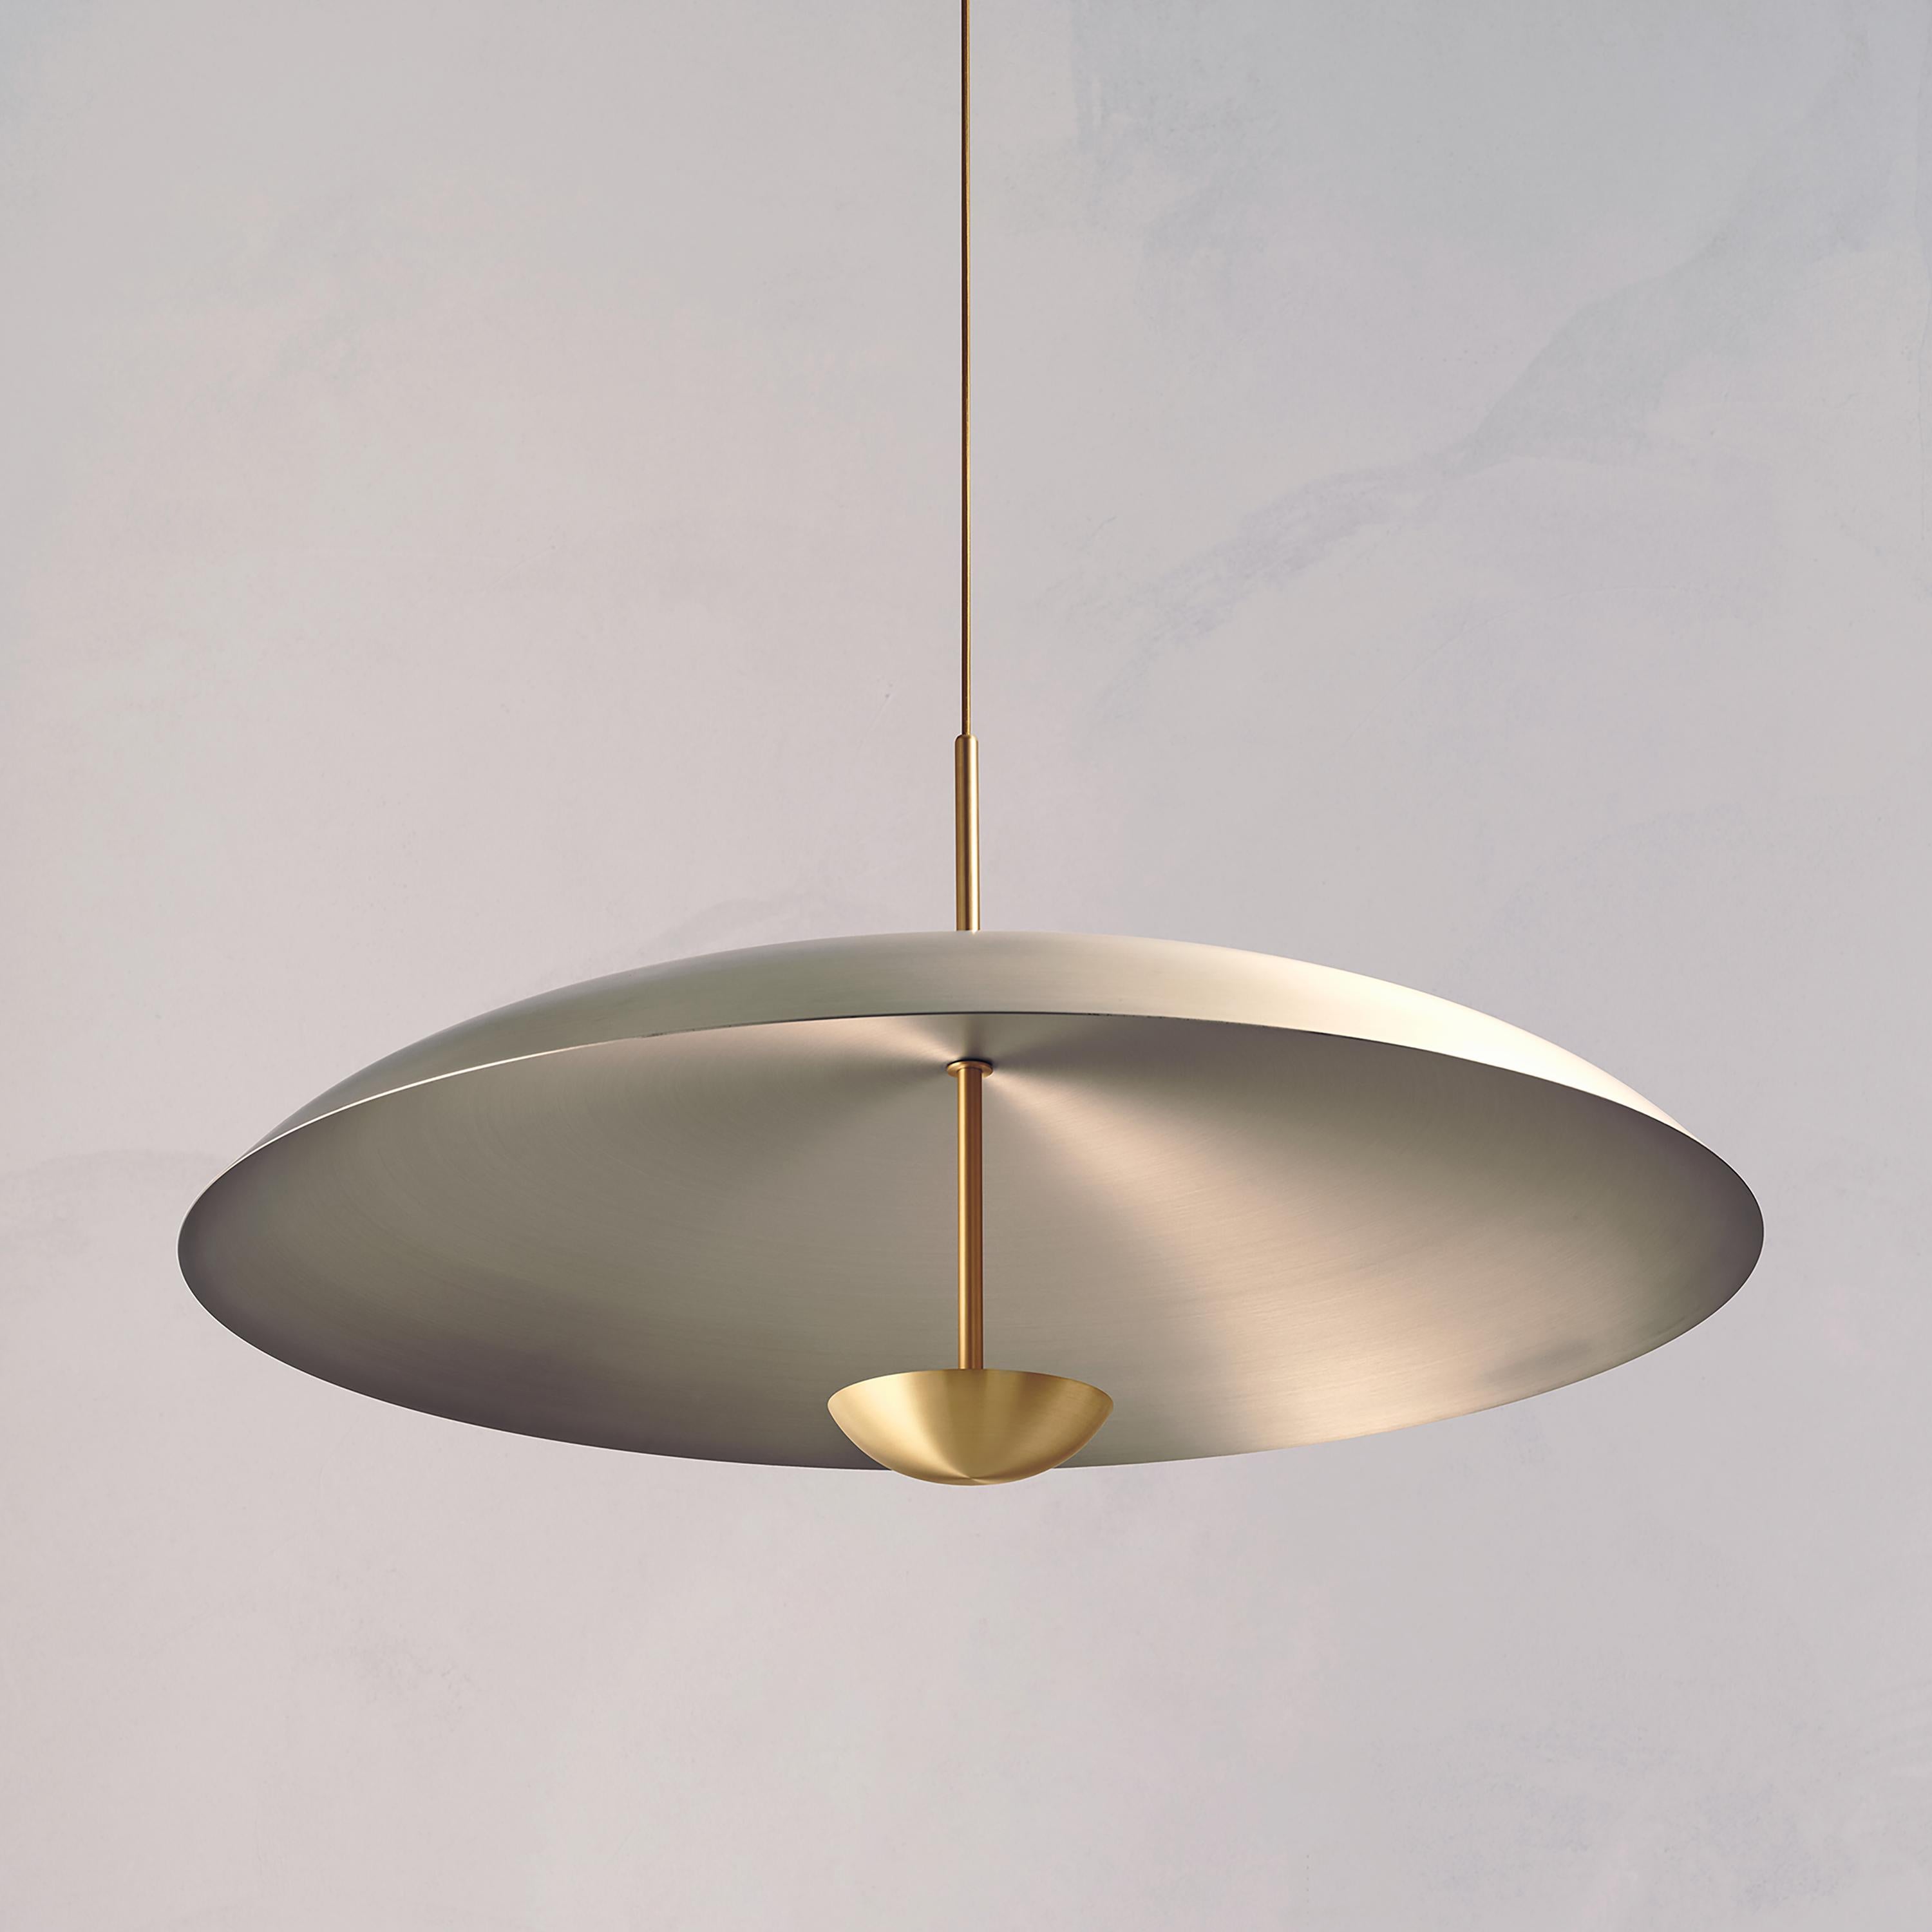 British 'Seleno Sol Pendant 70' Handmade Brushed Steel and Brass Ceiling Lamp For Sale